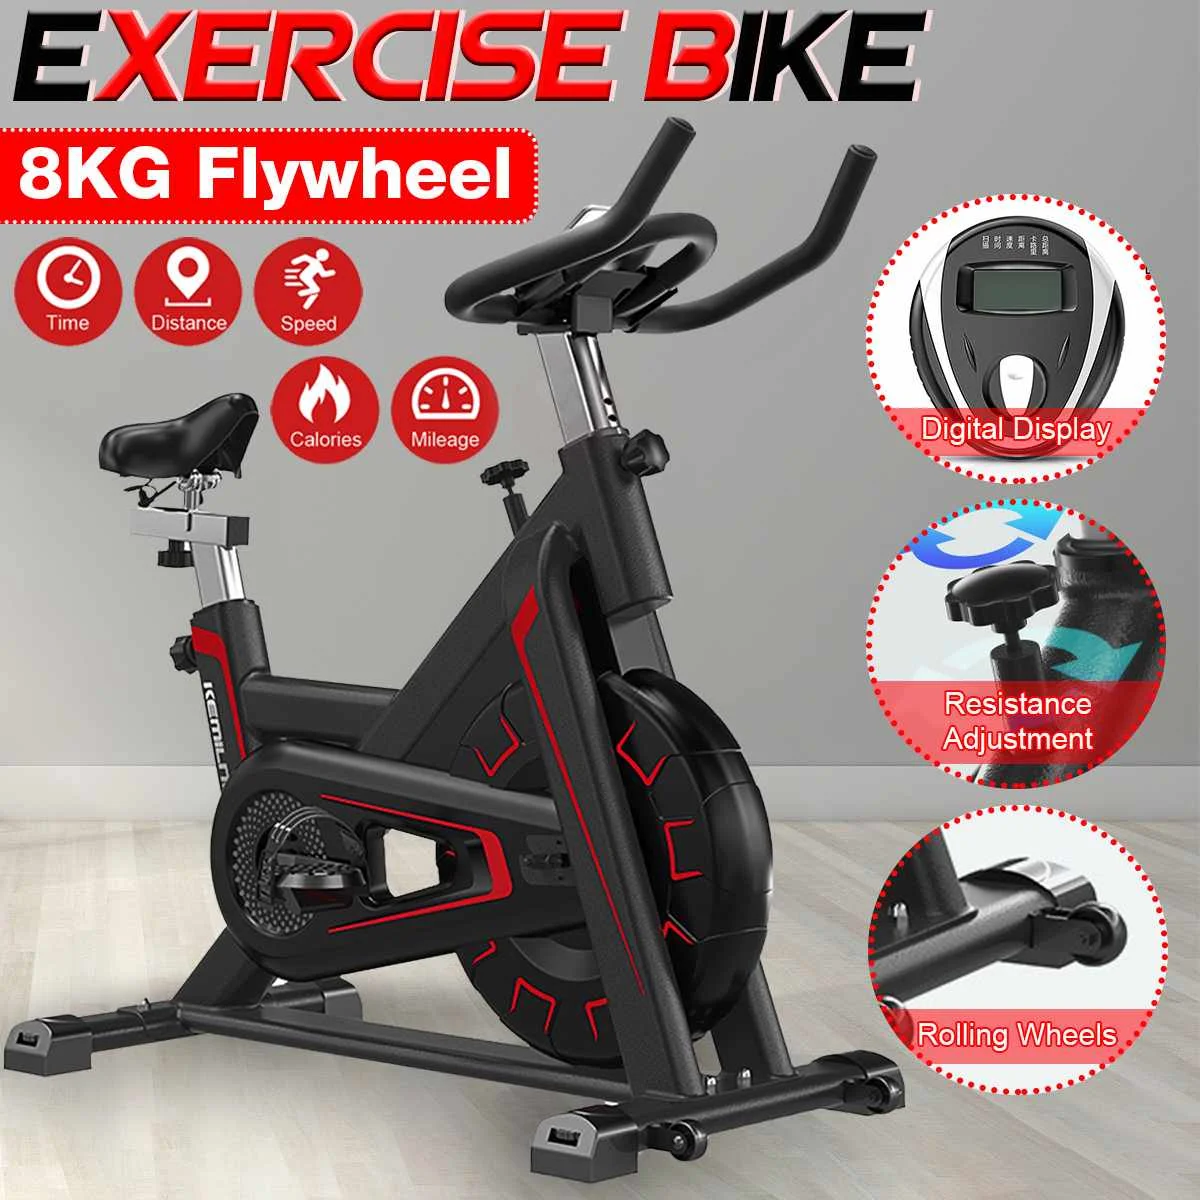 Permalink to Exercise Bike Home Ultra-quiet Indoor Weight Loss Pedal Exercise Bike Spinning Bike Indoor Fitness Equipment Bearing 150 KG